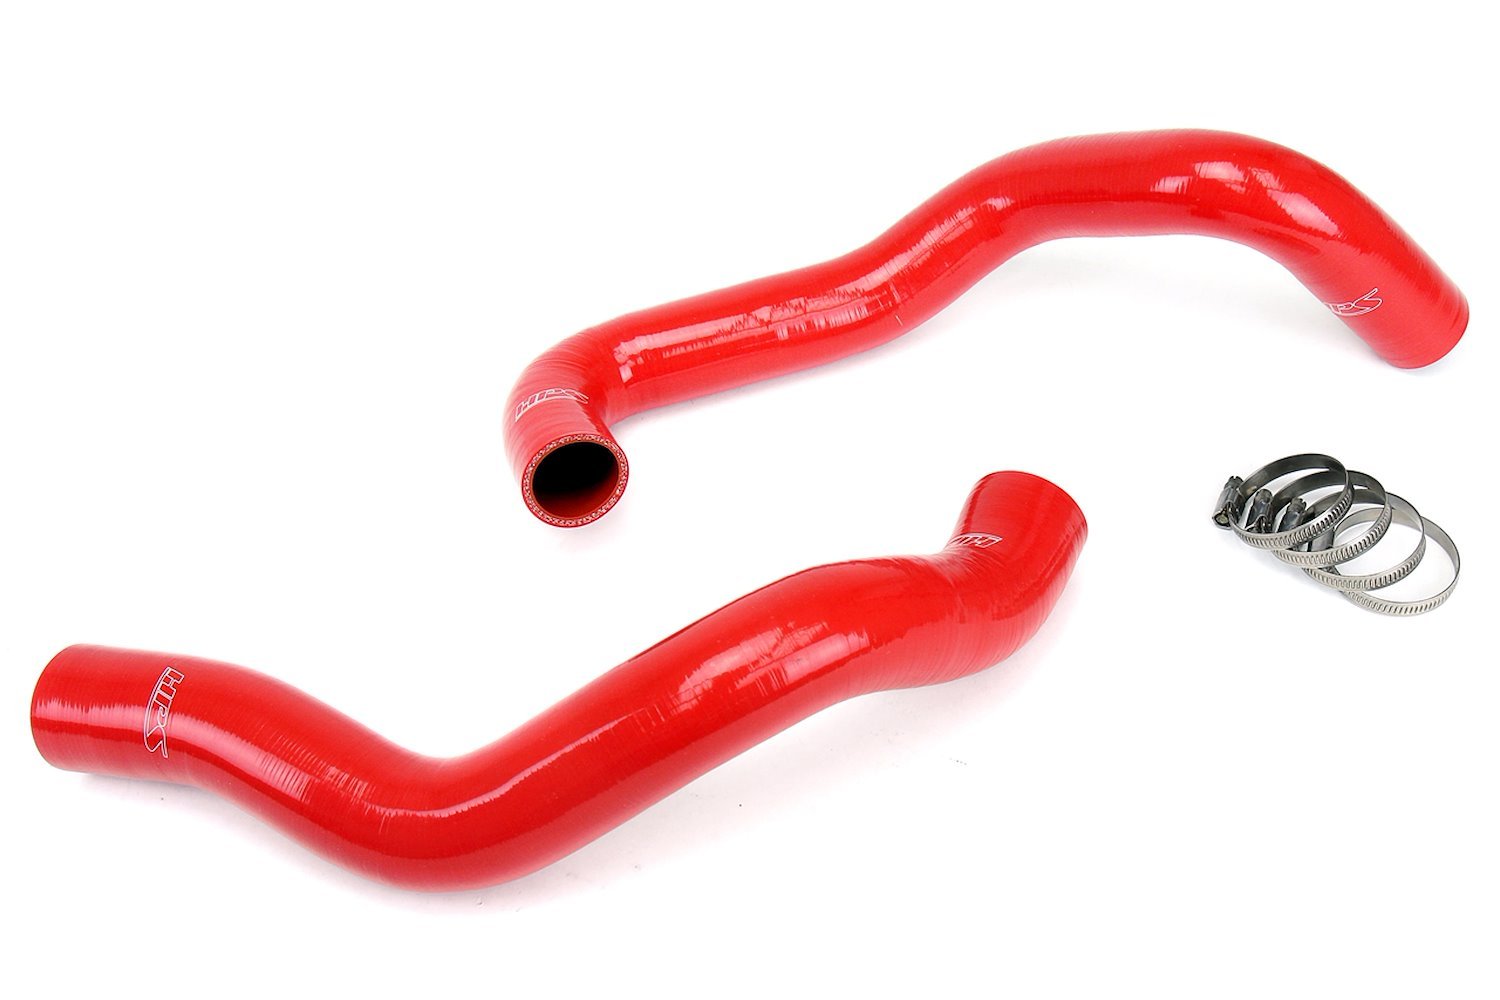 57-1011-RED Radiator Hose Kit, High-Temp 3-Ply Reinforced Silicone, Replace OEM Rubber Radiator Coolant Hoses